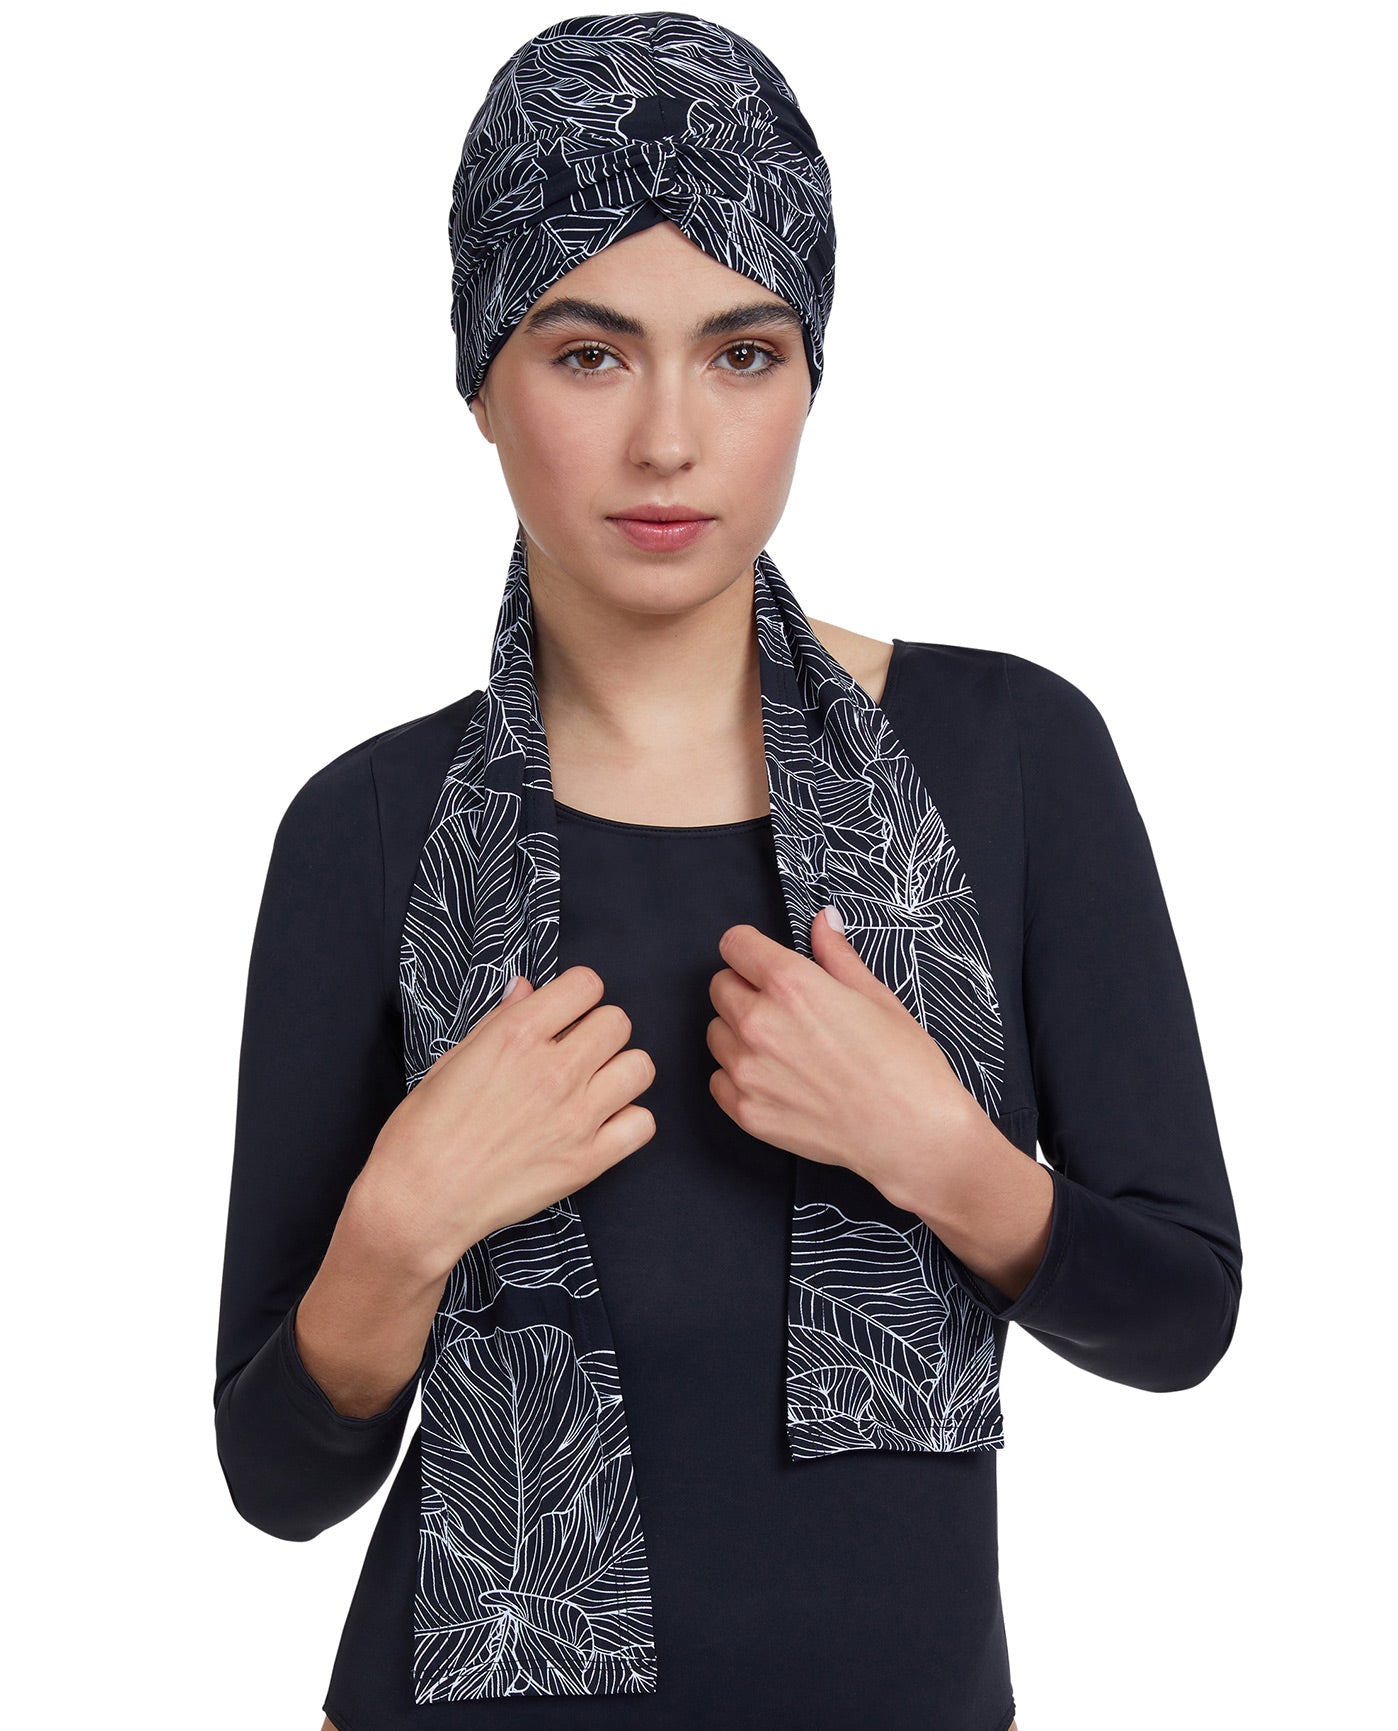 Front View Of Gottex Modest Hair Covering With Tie | GOTTEX MODEST BLACK AND WHITE LEAF